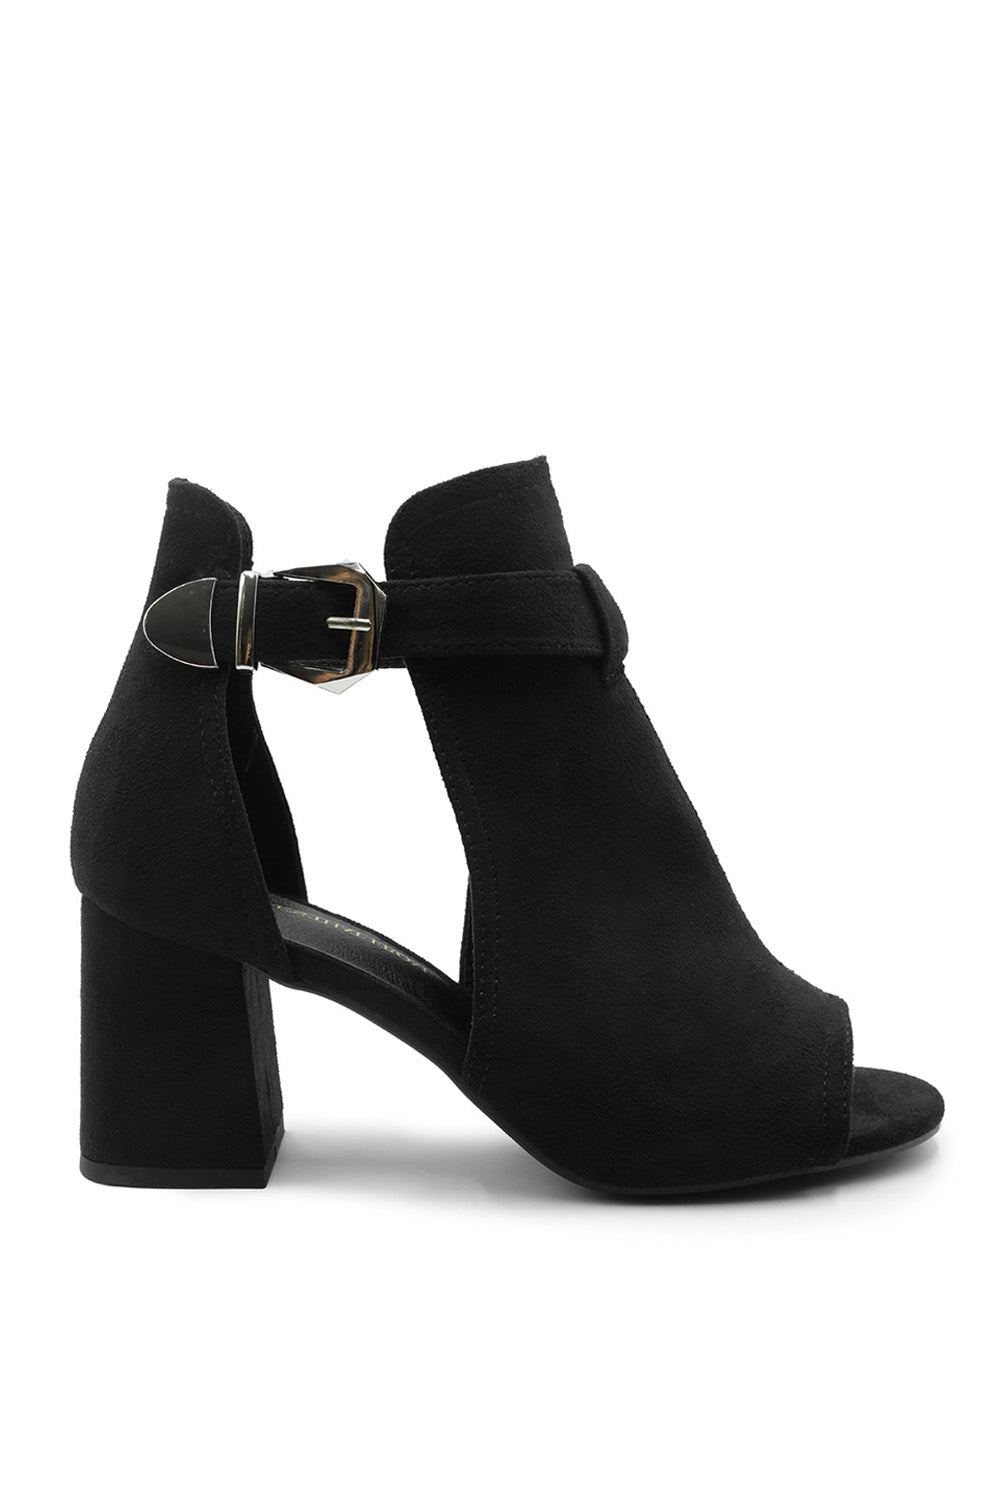 LISA WIDE FIT BLOCK HEEL WITH SIDE BUCKLE AND OPEN TOE FRONT IN BLACK SUEDE